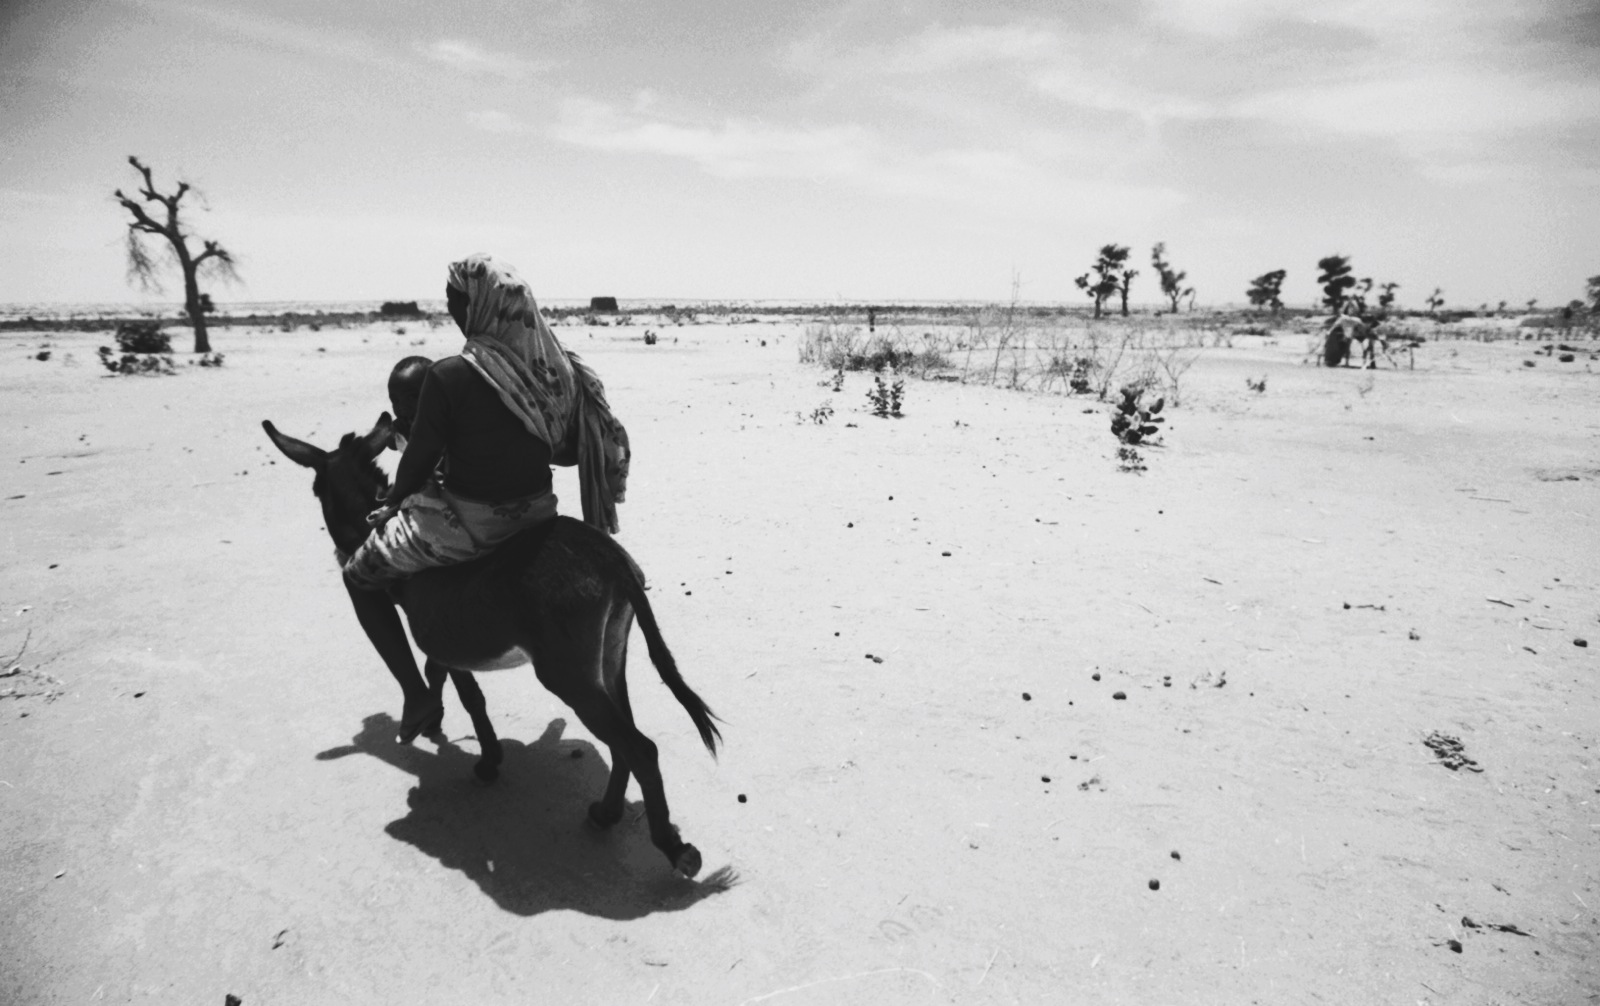 Mother and child ride a donkey in Darfur, Sudan.